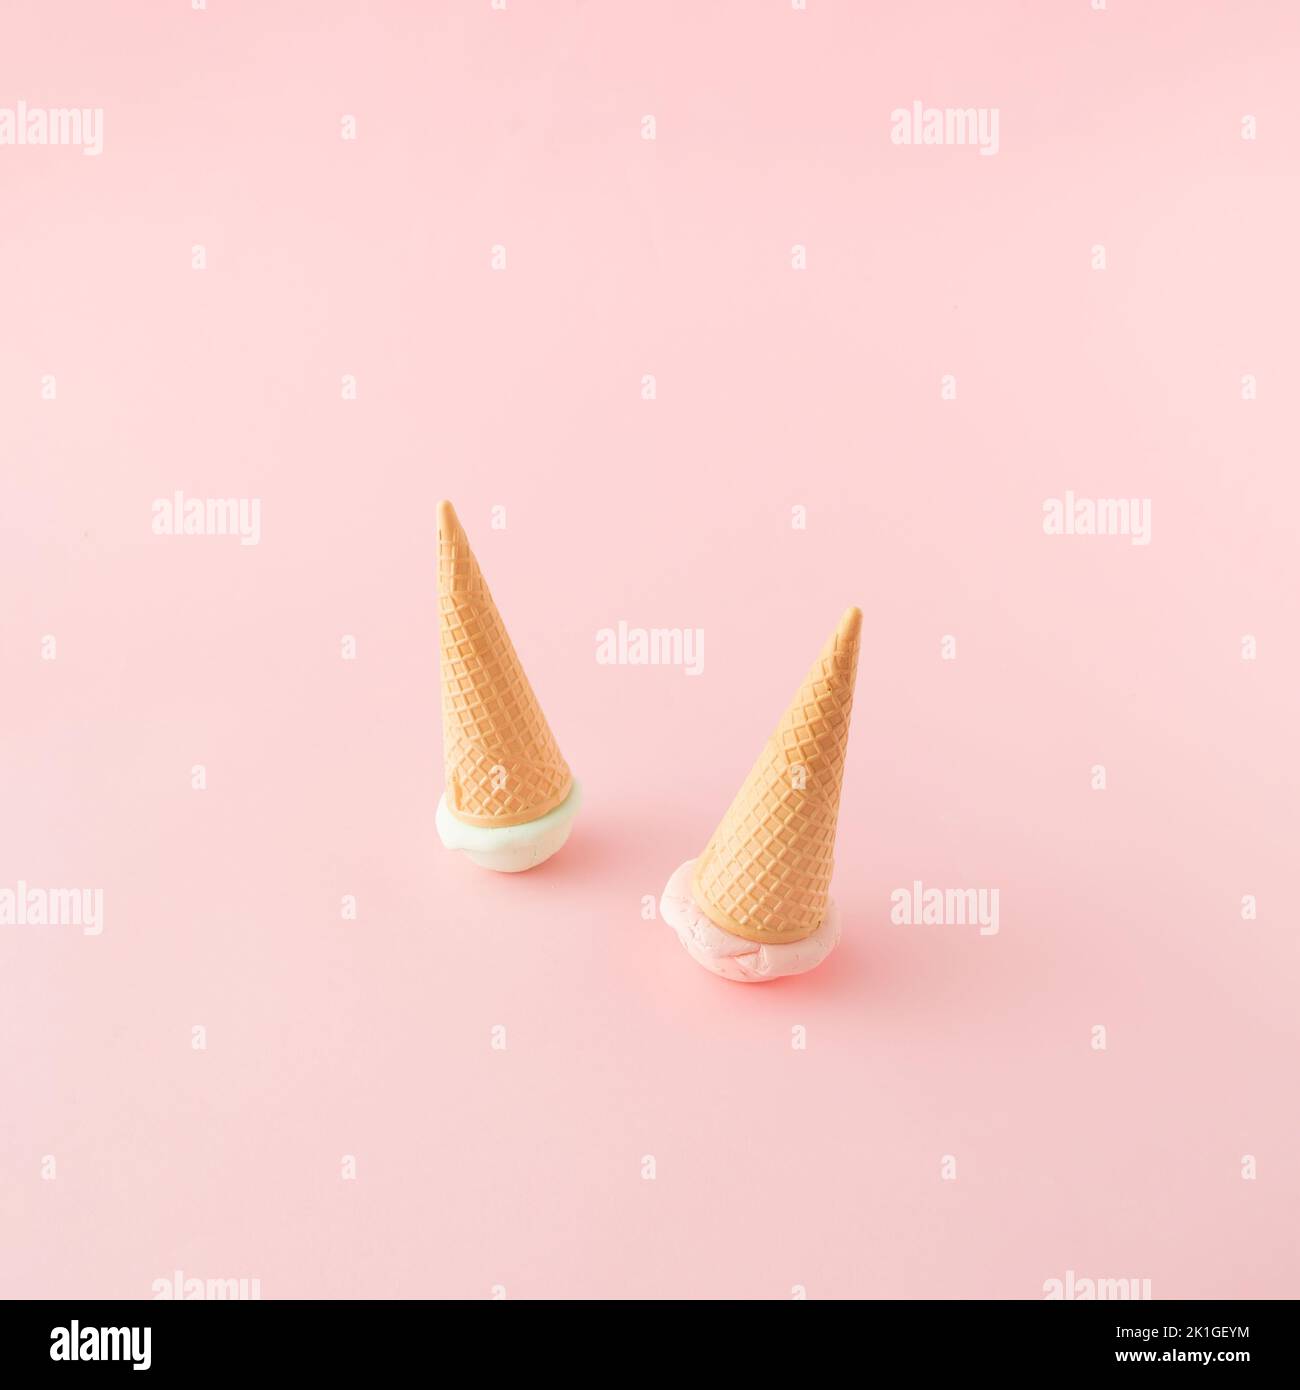 Two ice cream cones with green and pink scoops turned upside down on pink background. Top view. Minimal concept. Stock Photo